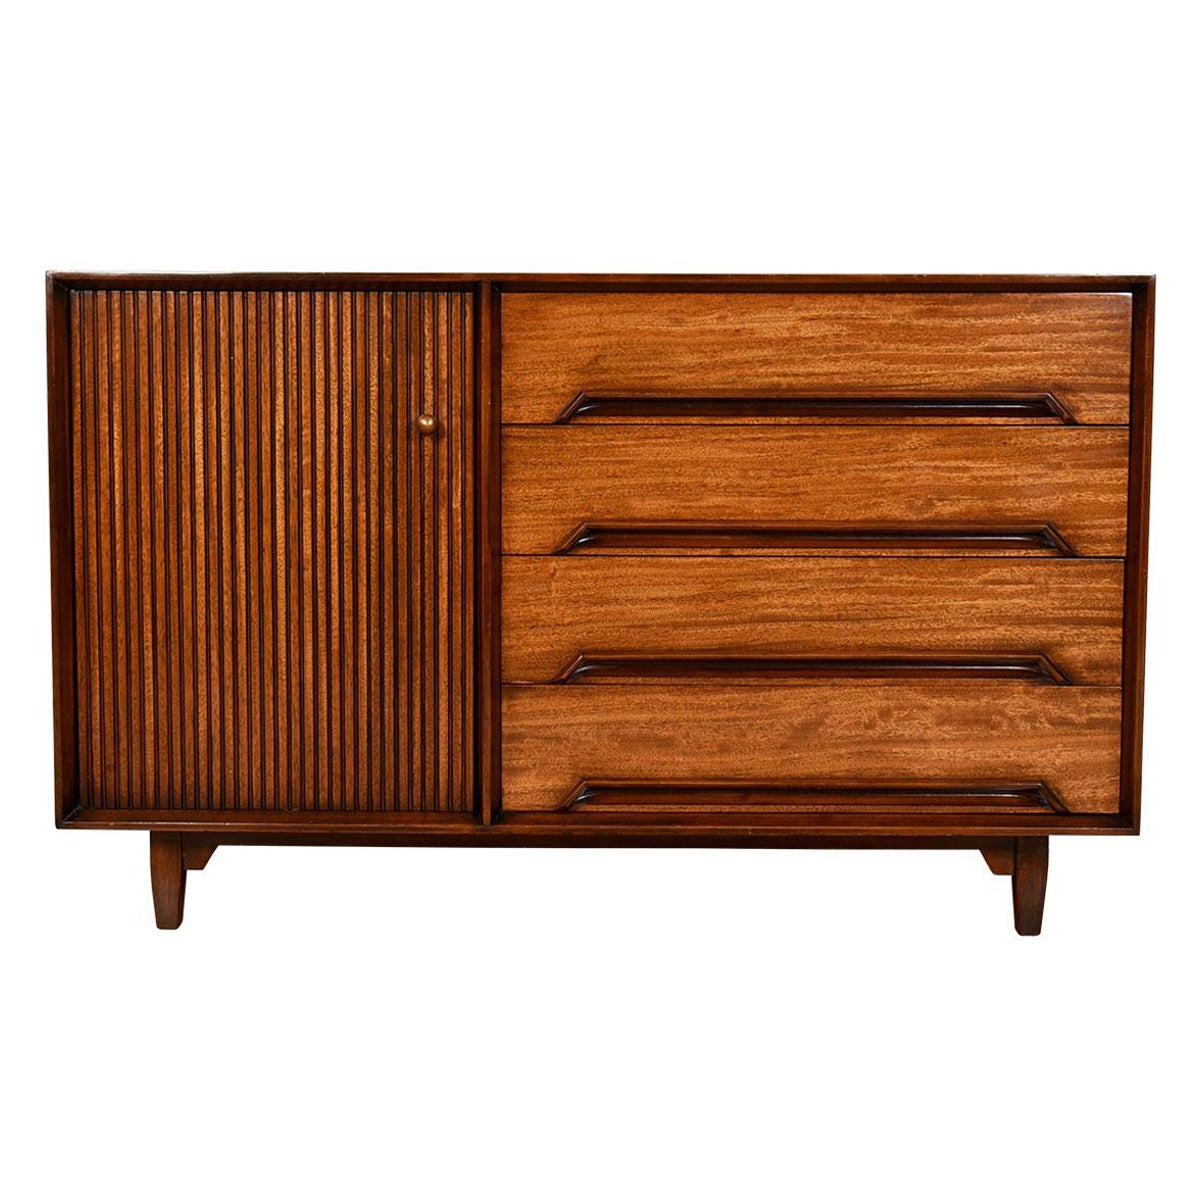 Exotic Mindoro Wood Cabinet by Milo Baughman for Drexel Perspective, 1951 For Sale